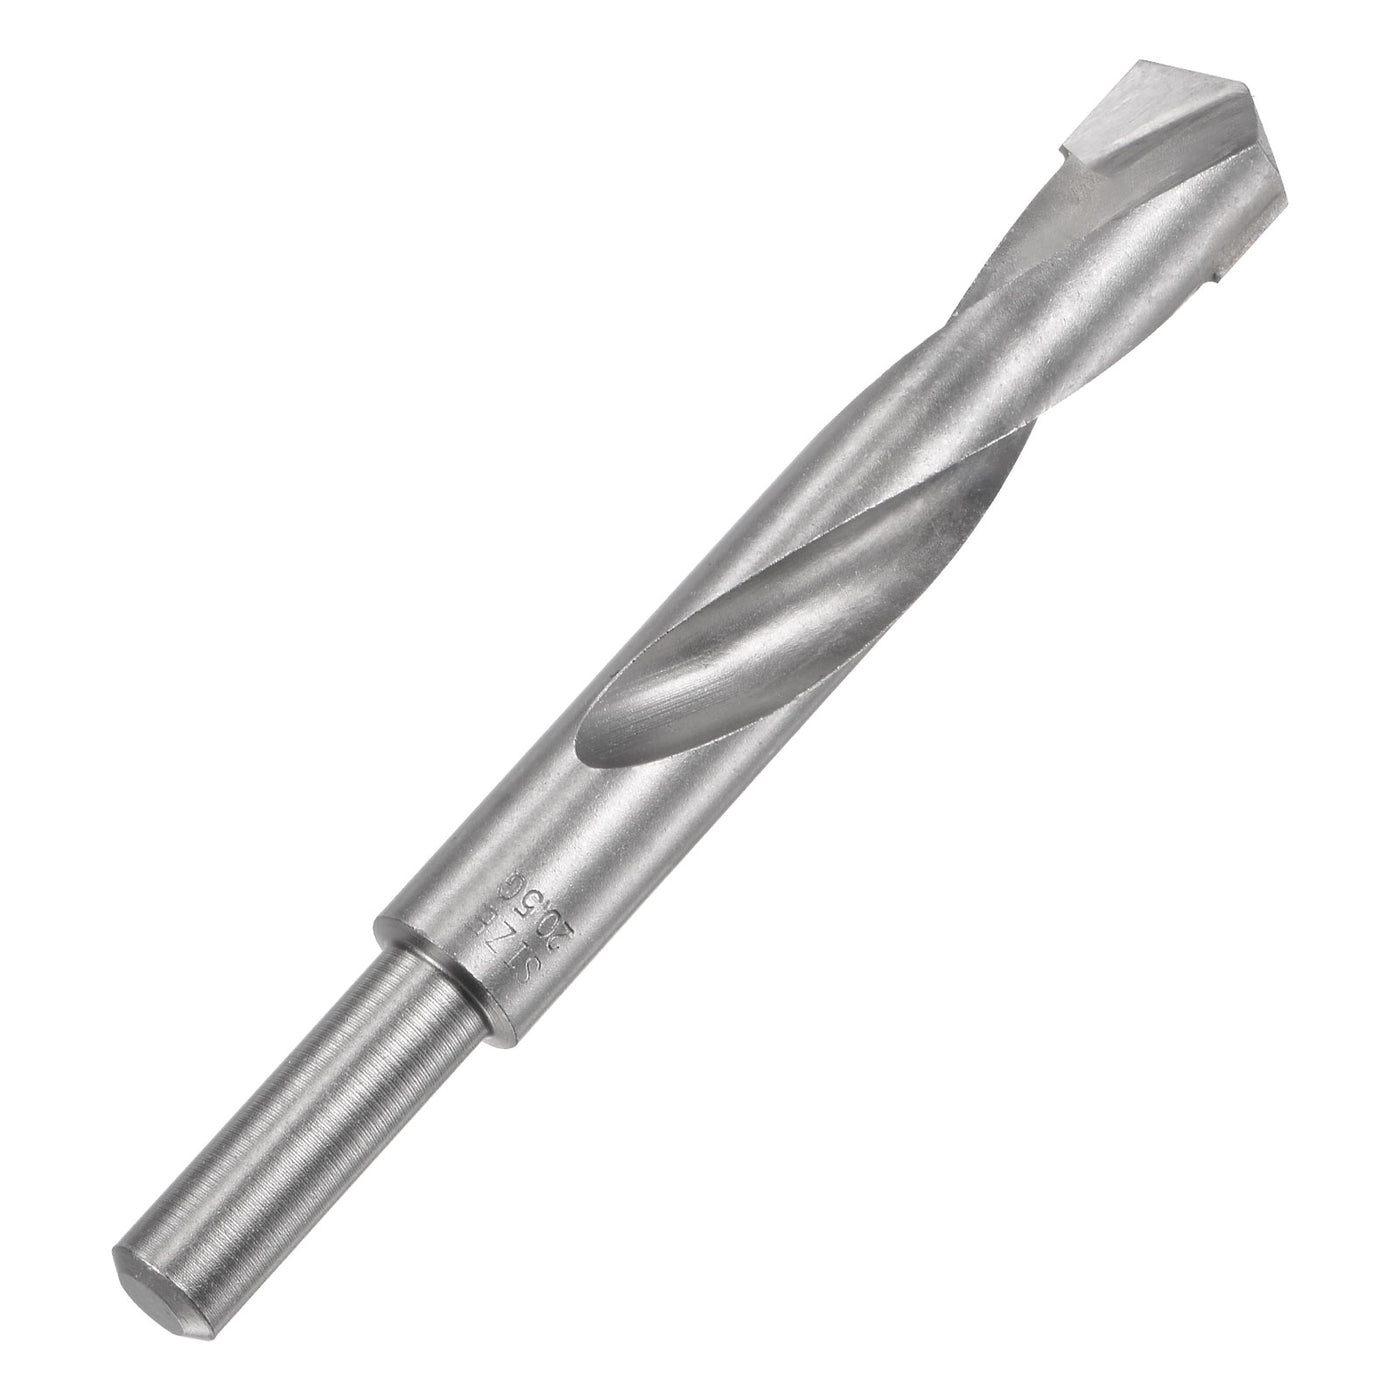 uxcell Uxcell Reduced Shank Cemented Carbide Twist Drill Bits, Straight Shank